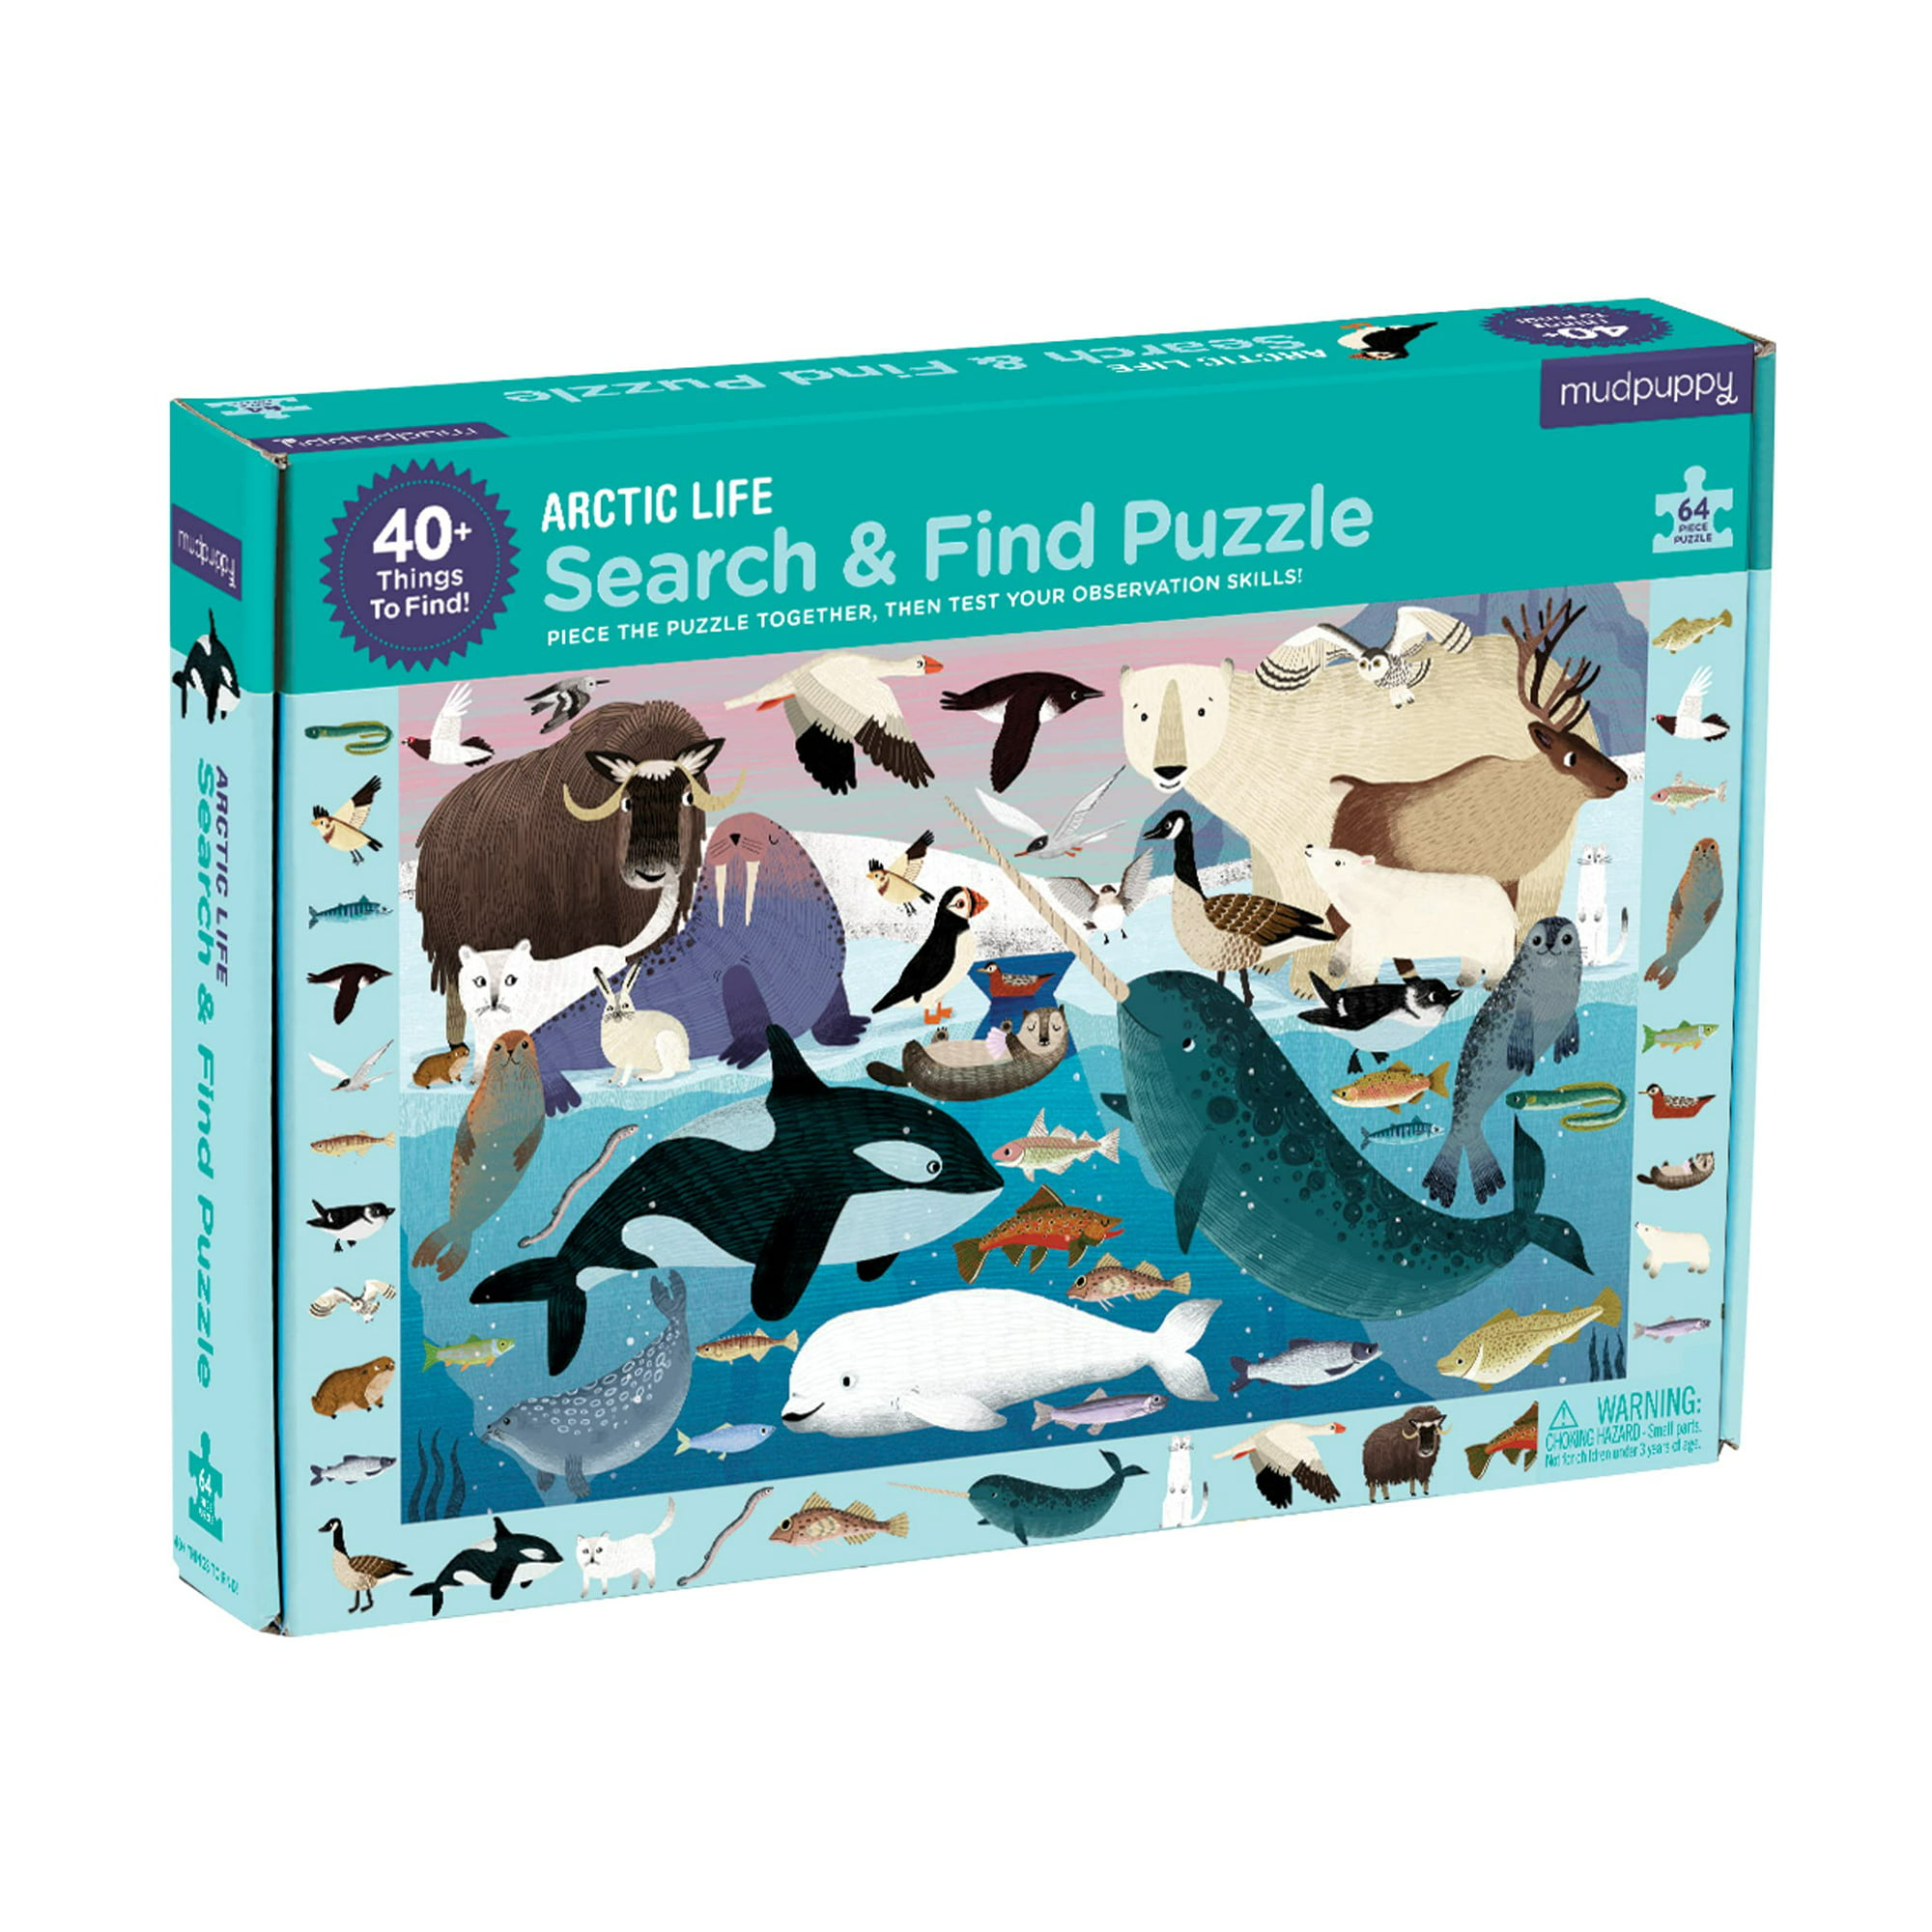 Mudpuppy Arctic Life Search & Find Puzzle, 64 Pieces, 23â€ â€ â€“ For  Kids Age 4-7 - Colorful Illustrations of Animals, Fish, Birds Living in the  Arctic â€“ Complete Puzzle to Find